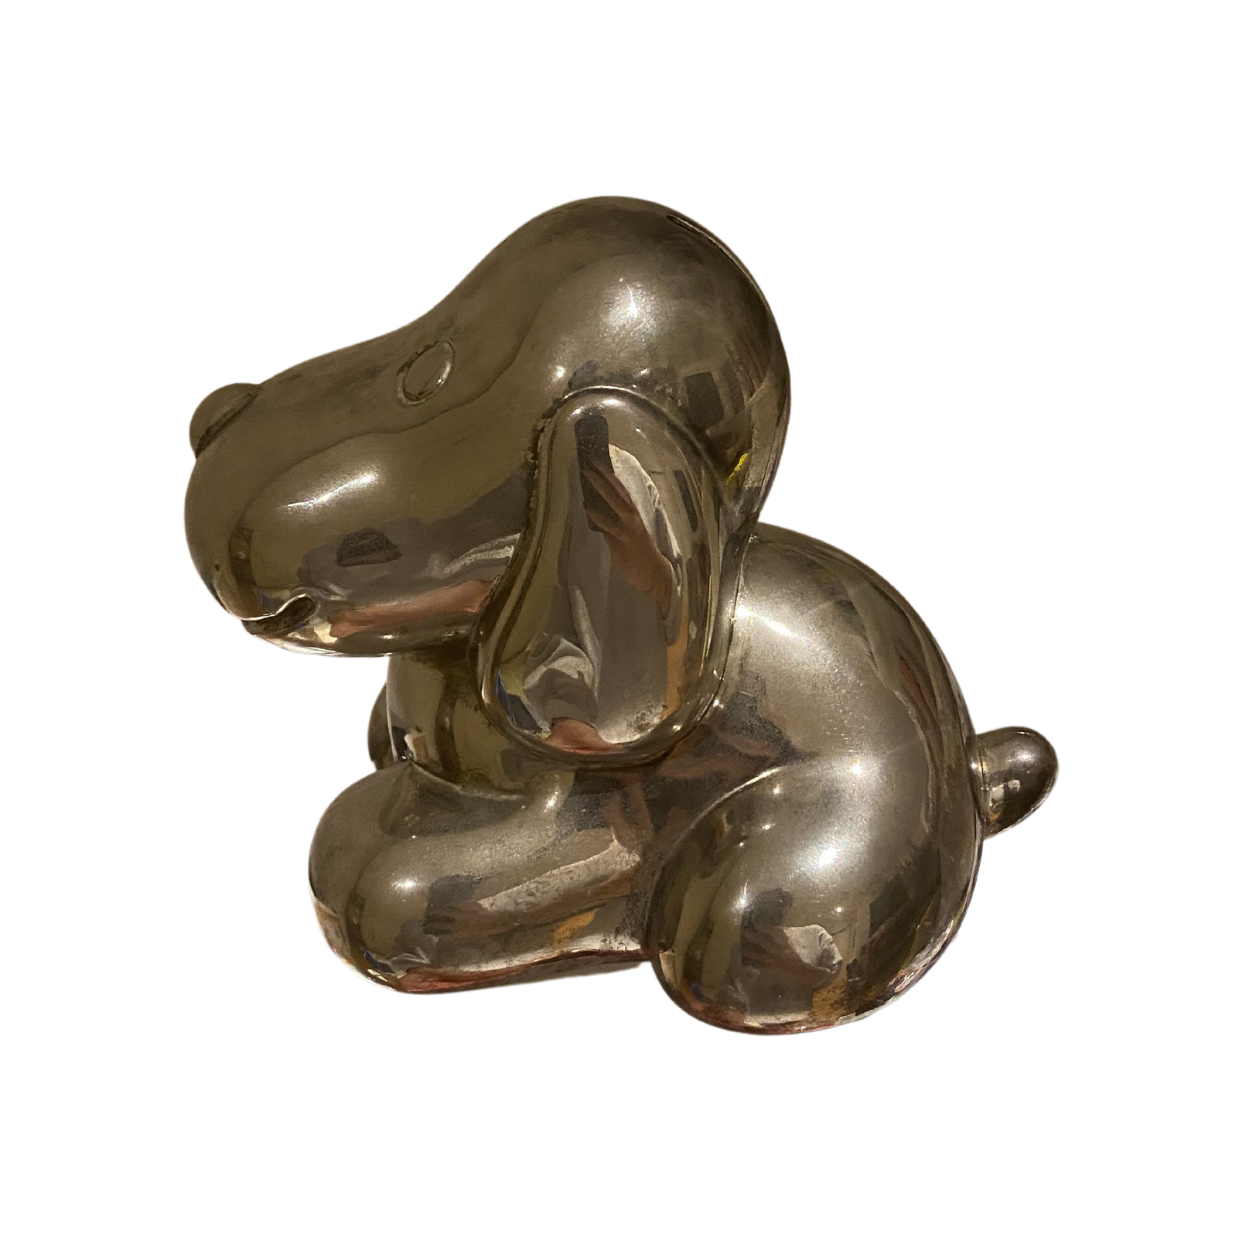 A photo of a small piggy bank in the shape of a hound, made of brass facing left.